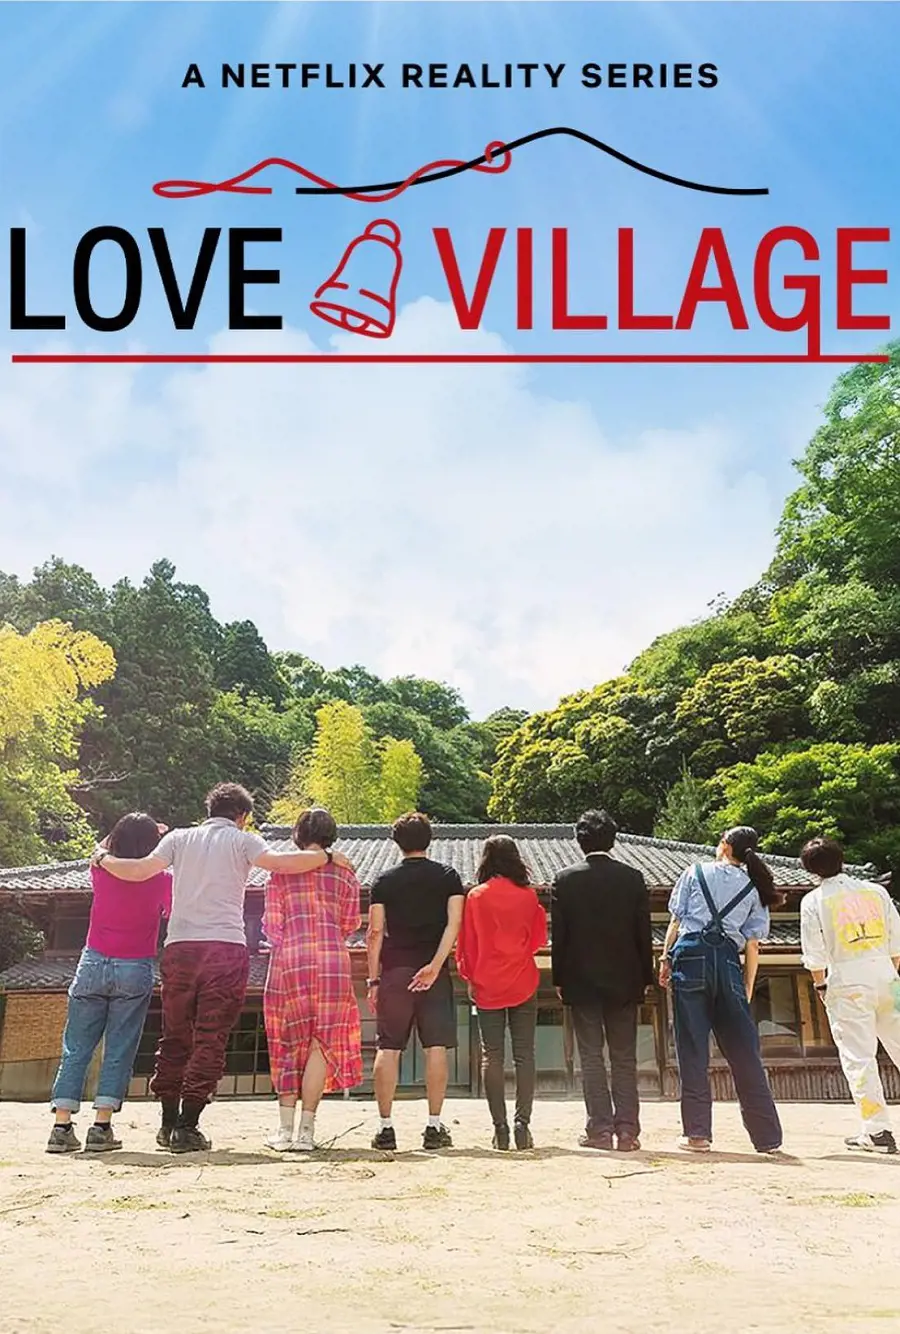 The new Netflix dating shows Love Village centered on a 16 Japanese singles group who hope to find love. 